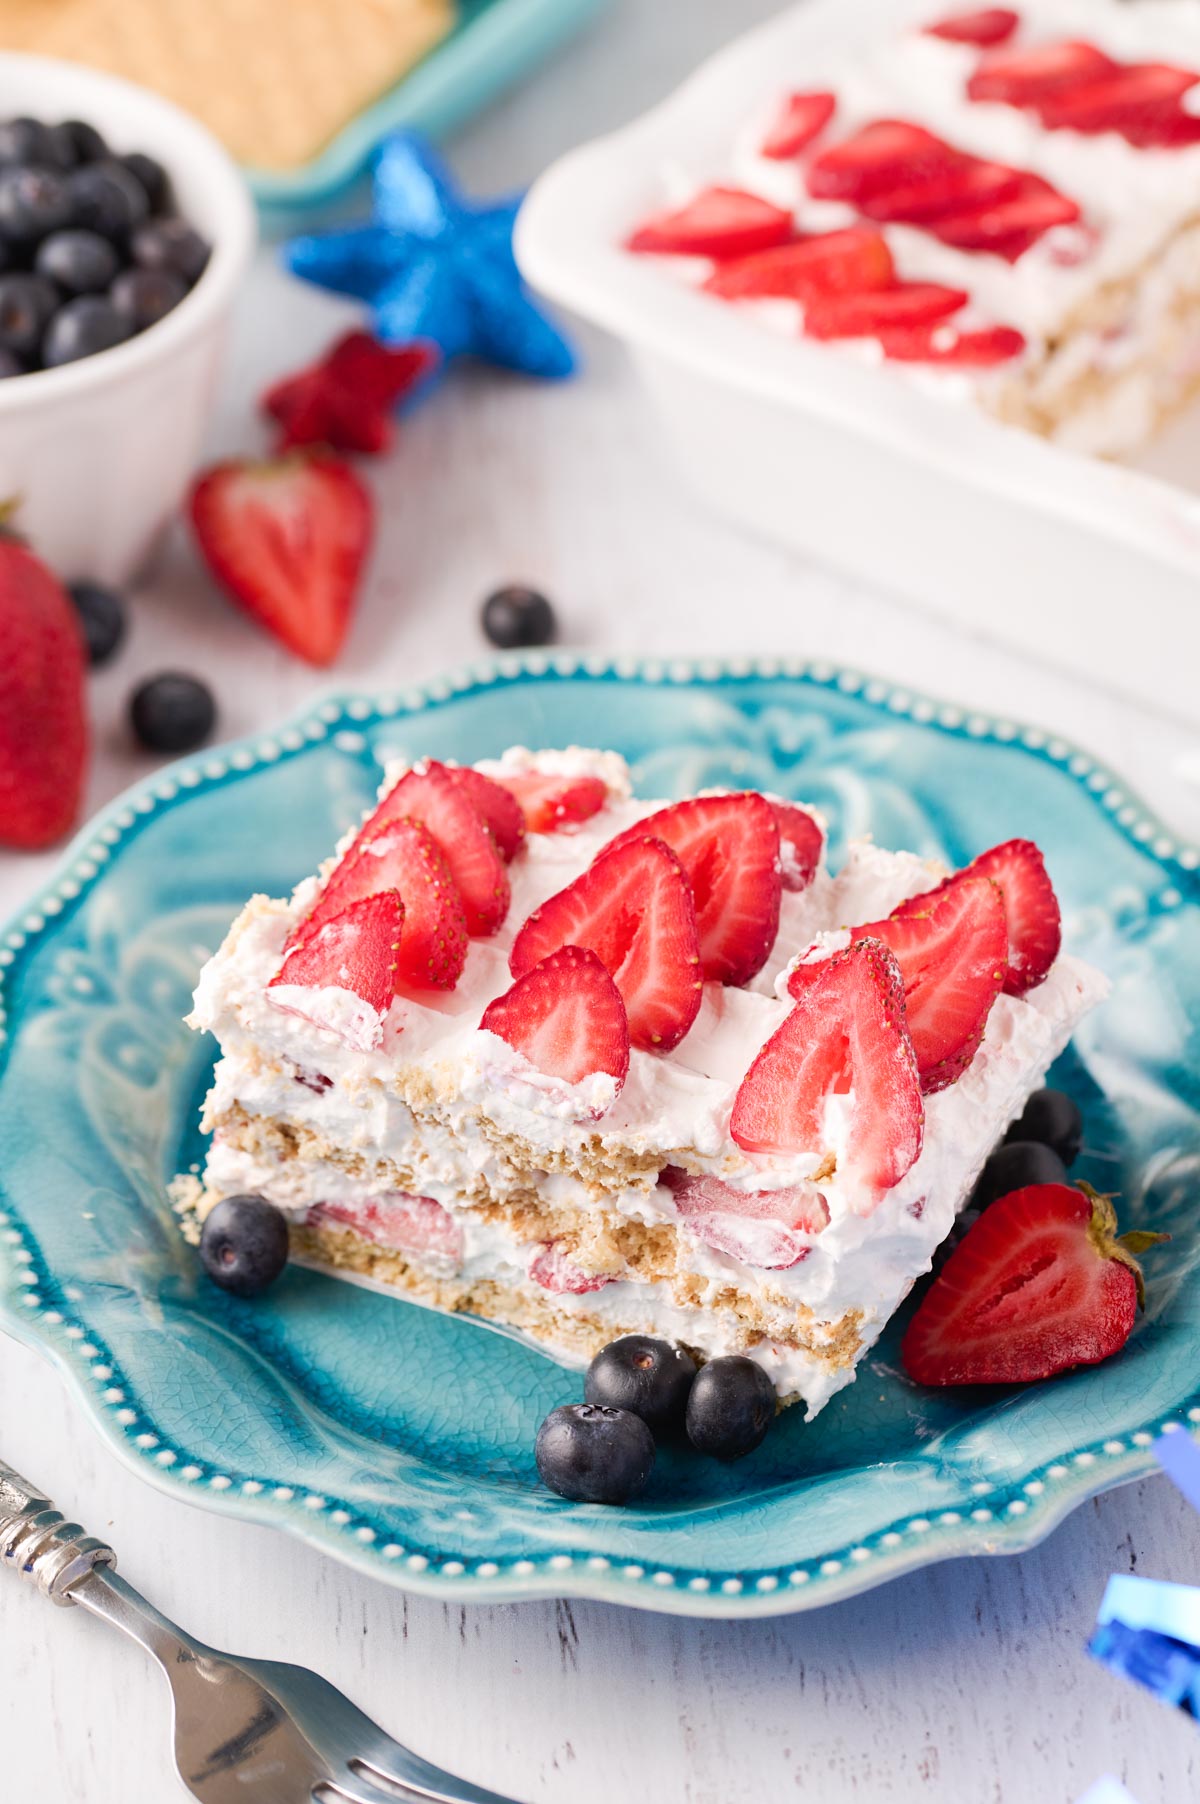 Slice of strawberry icebox cake sits on a blue plate with fresh blueberries and strawberries